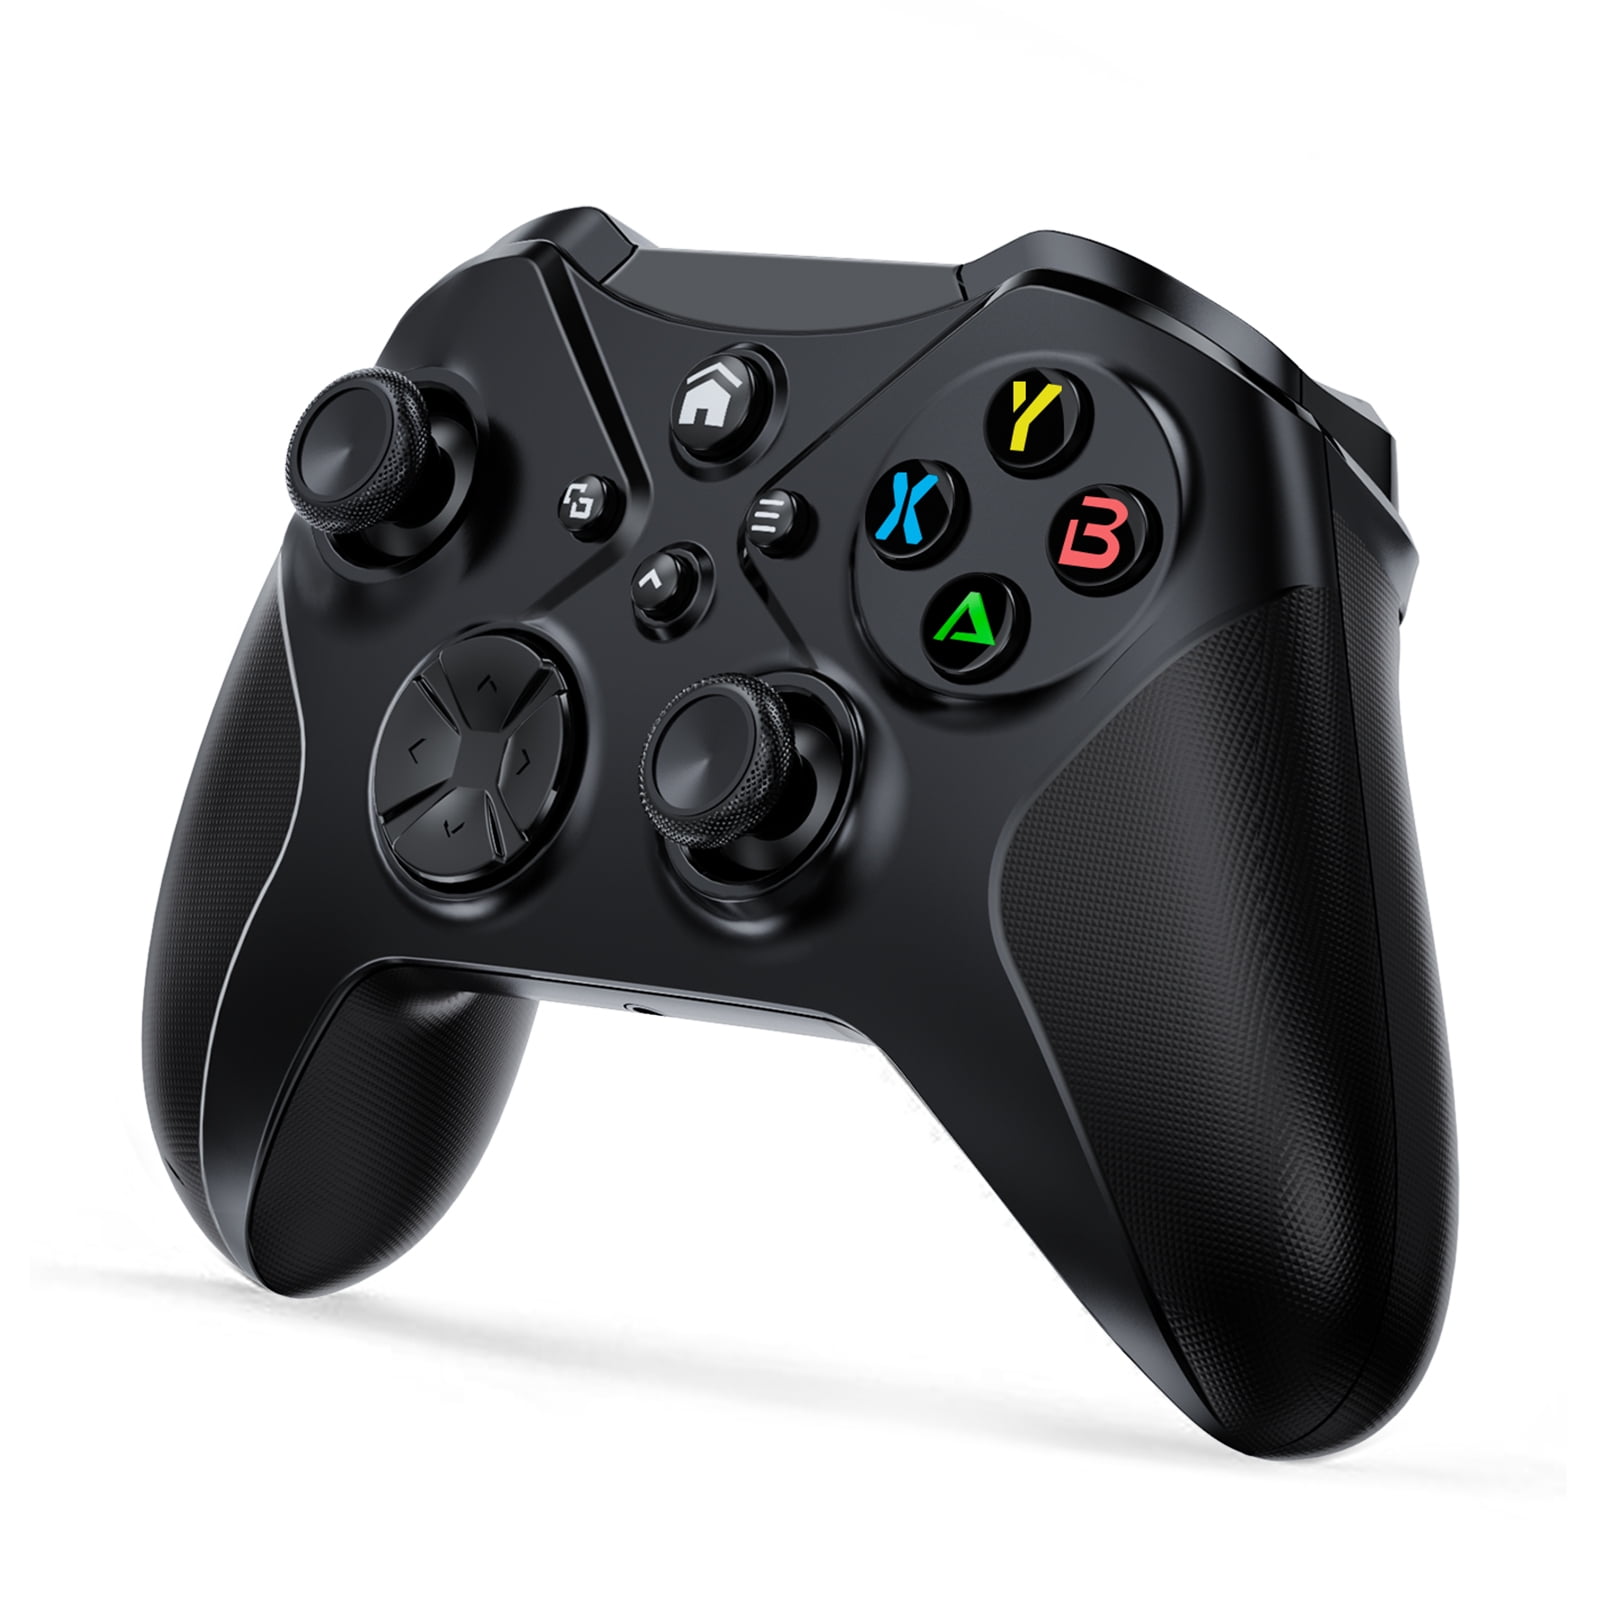 Bonadget Wireless Controller for Xbox One with 3.5mm Headphone